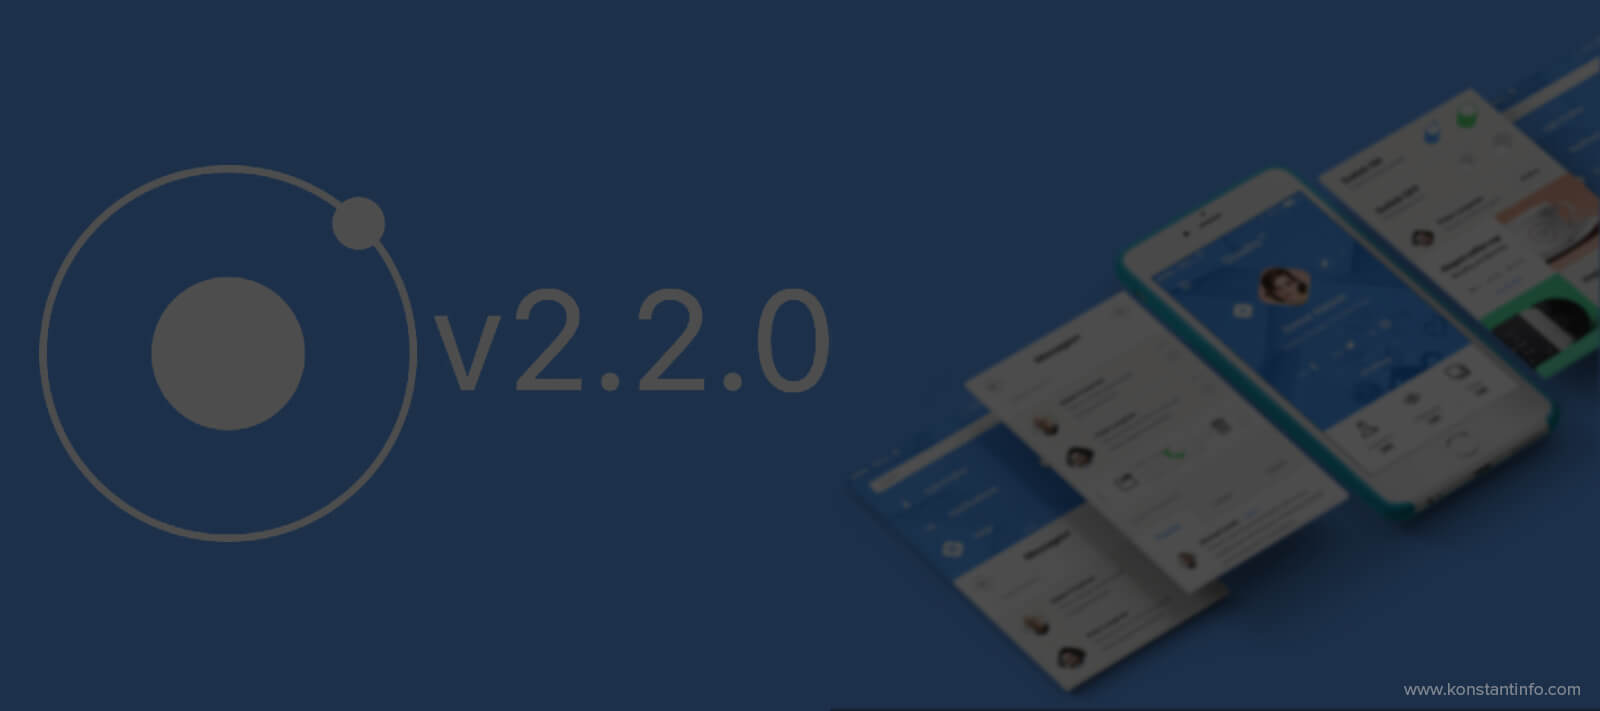 Ionic 2.2.0 Update is Out with Two New Features